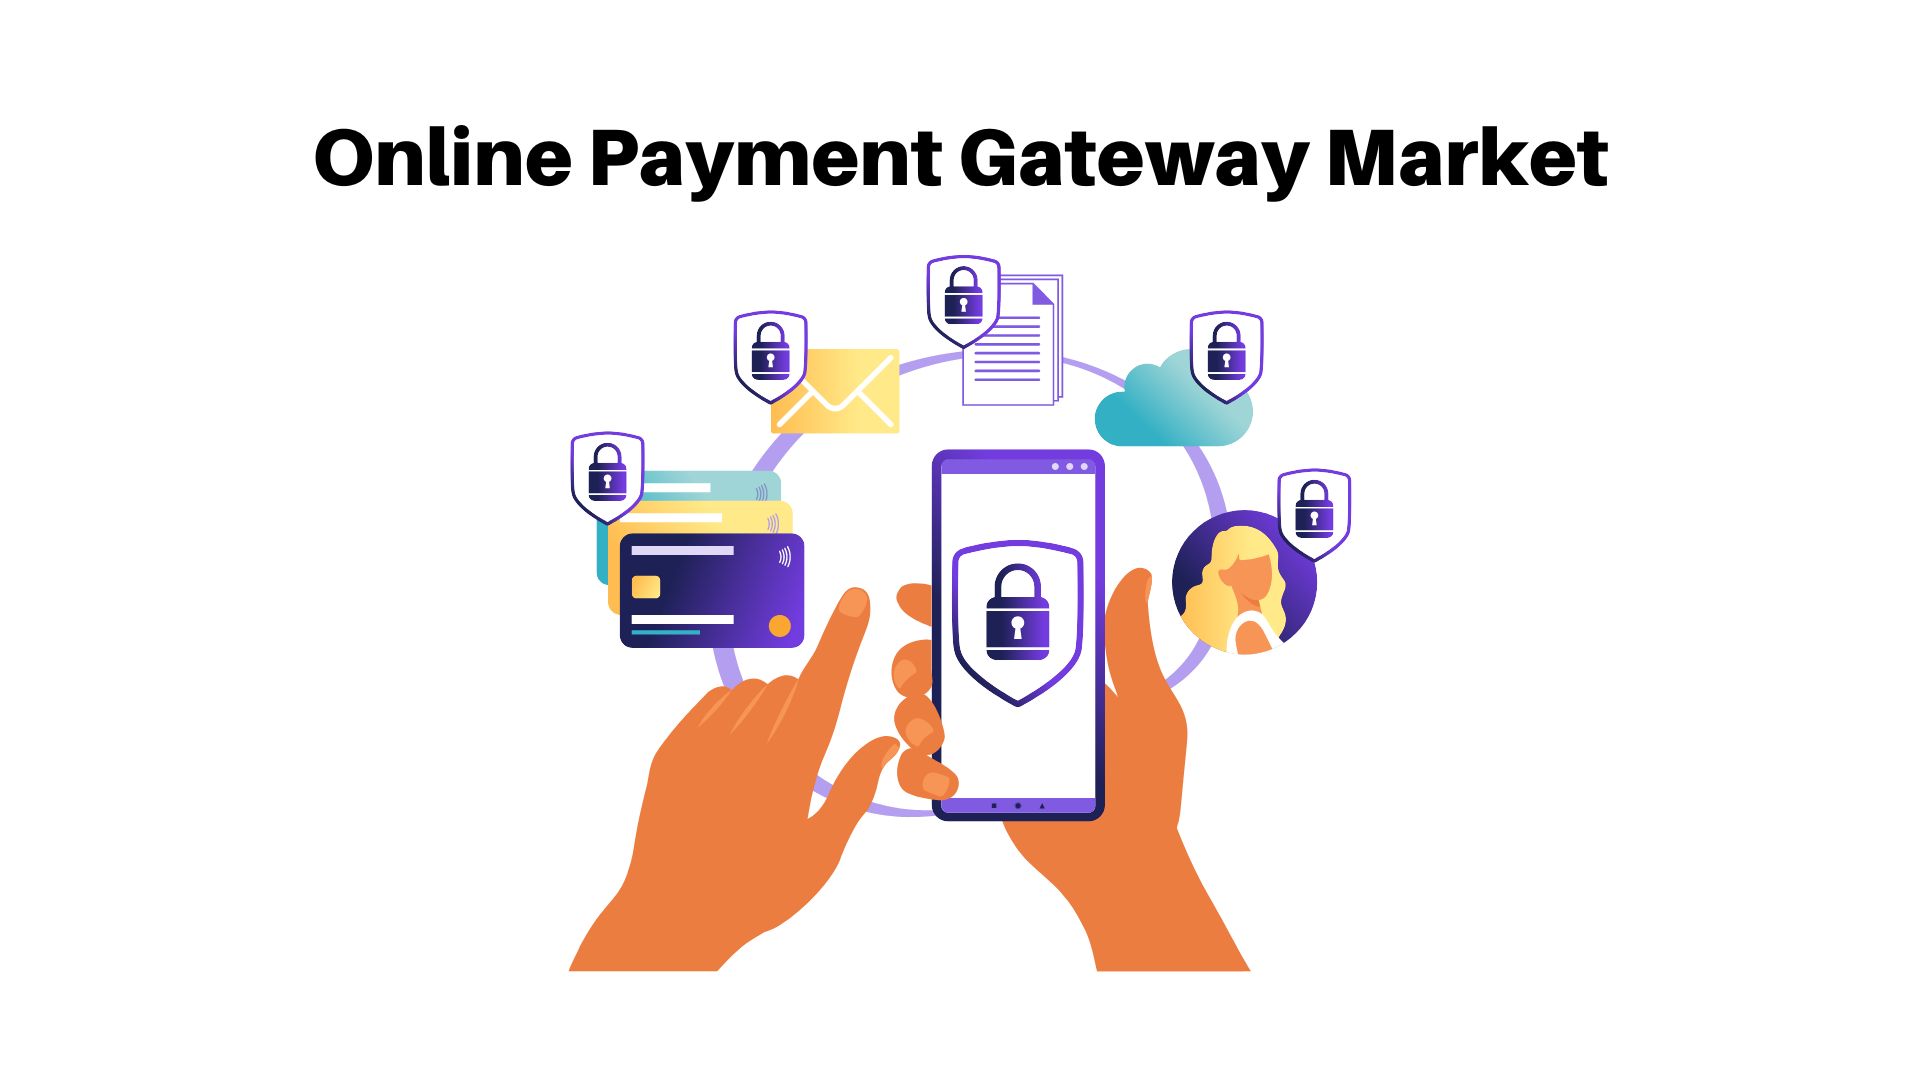 Online Payment Gateway Market is poised to grow at a CAGR of